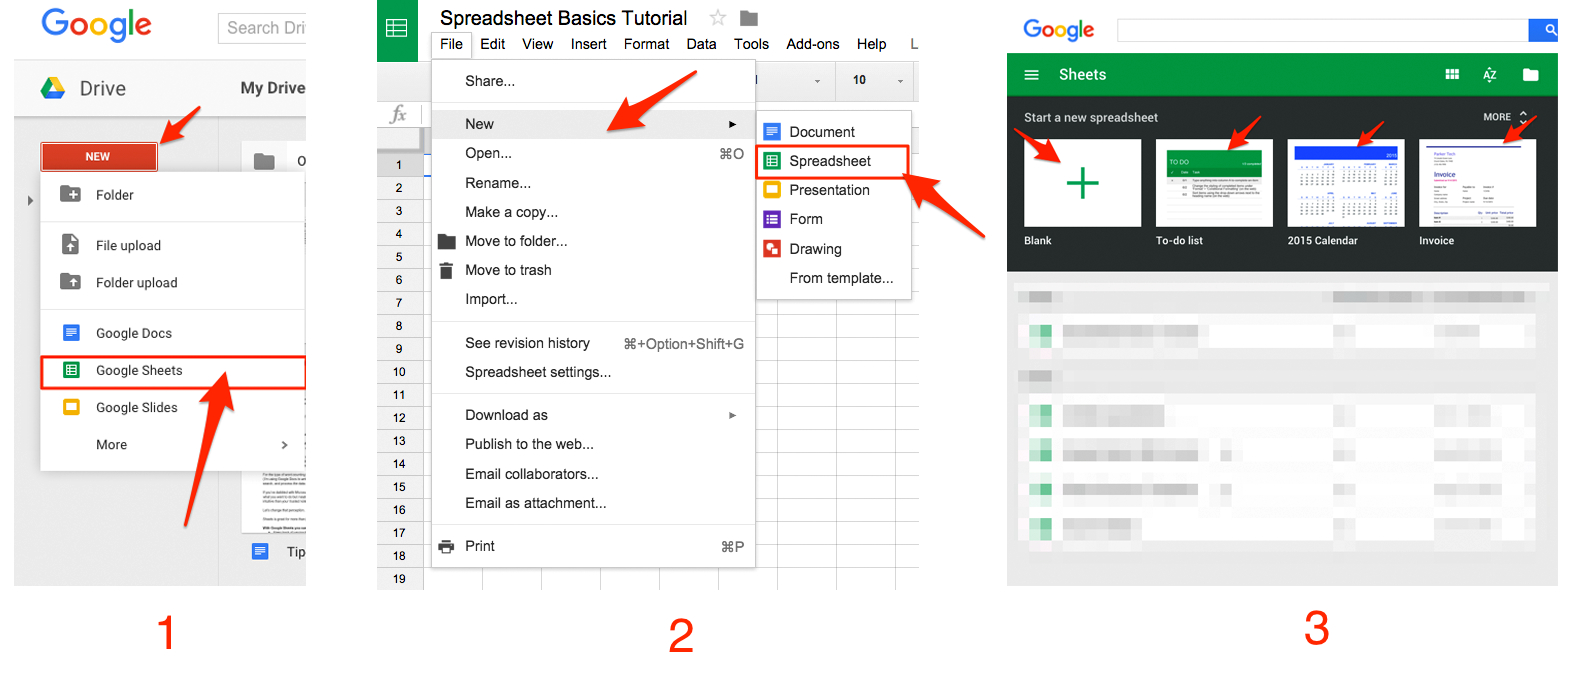 Google Sheets 101: The Beginner's Guide To Online Spreadsheets - The for Spreadsheet Google